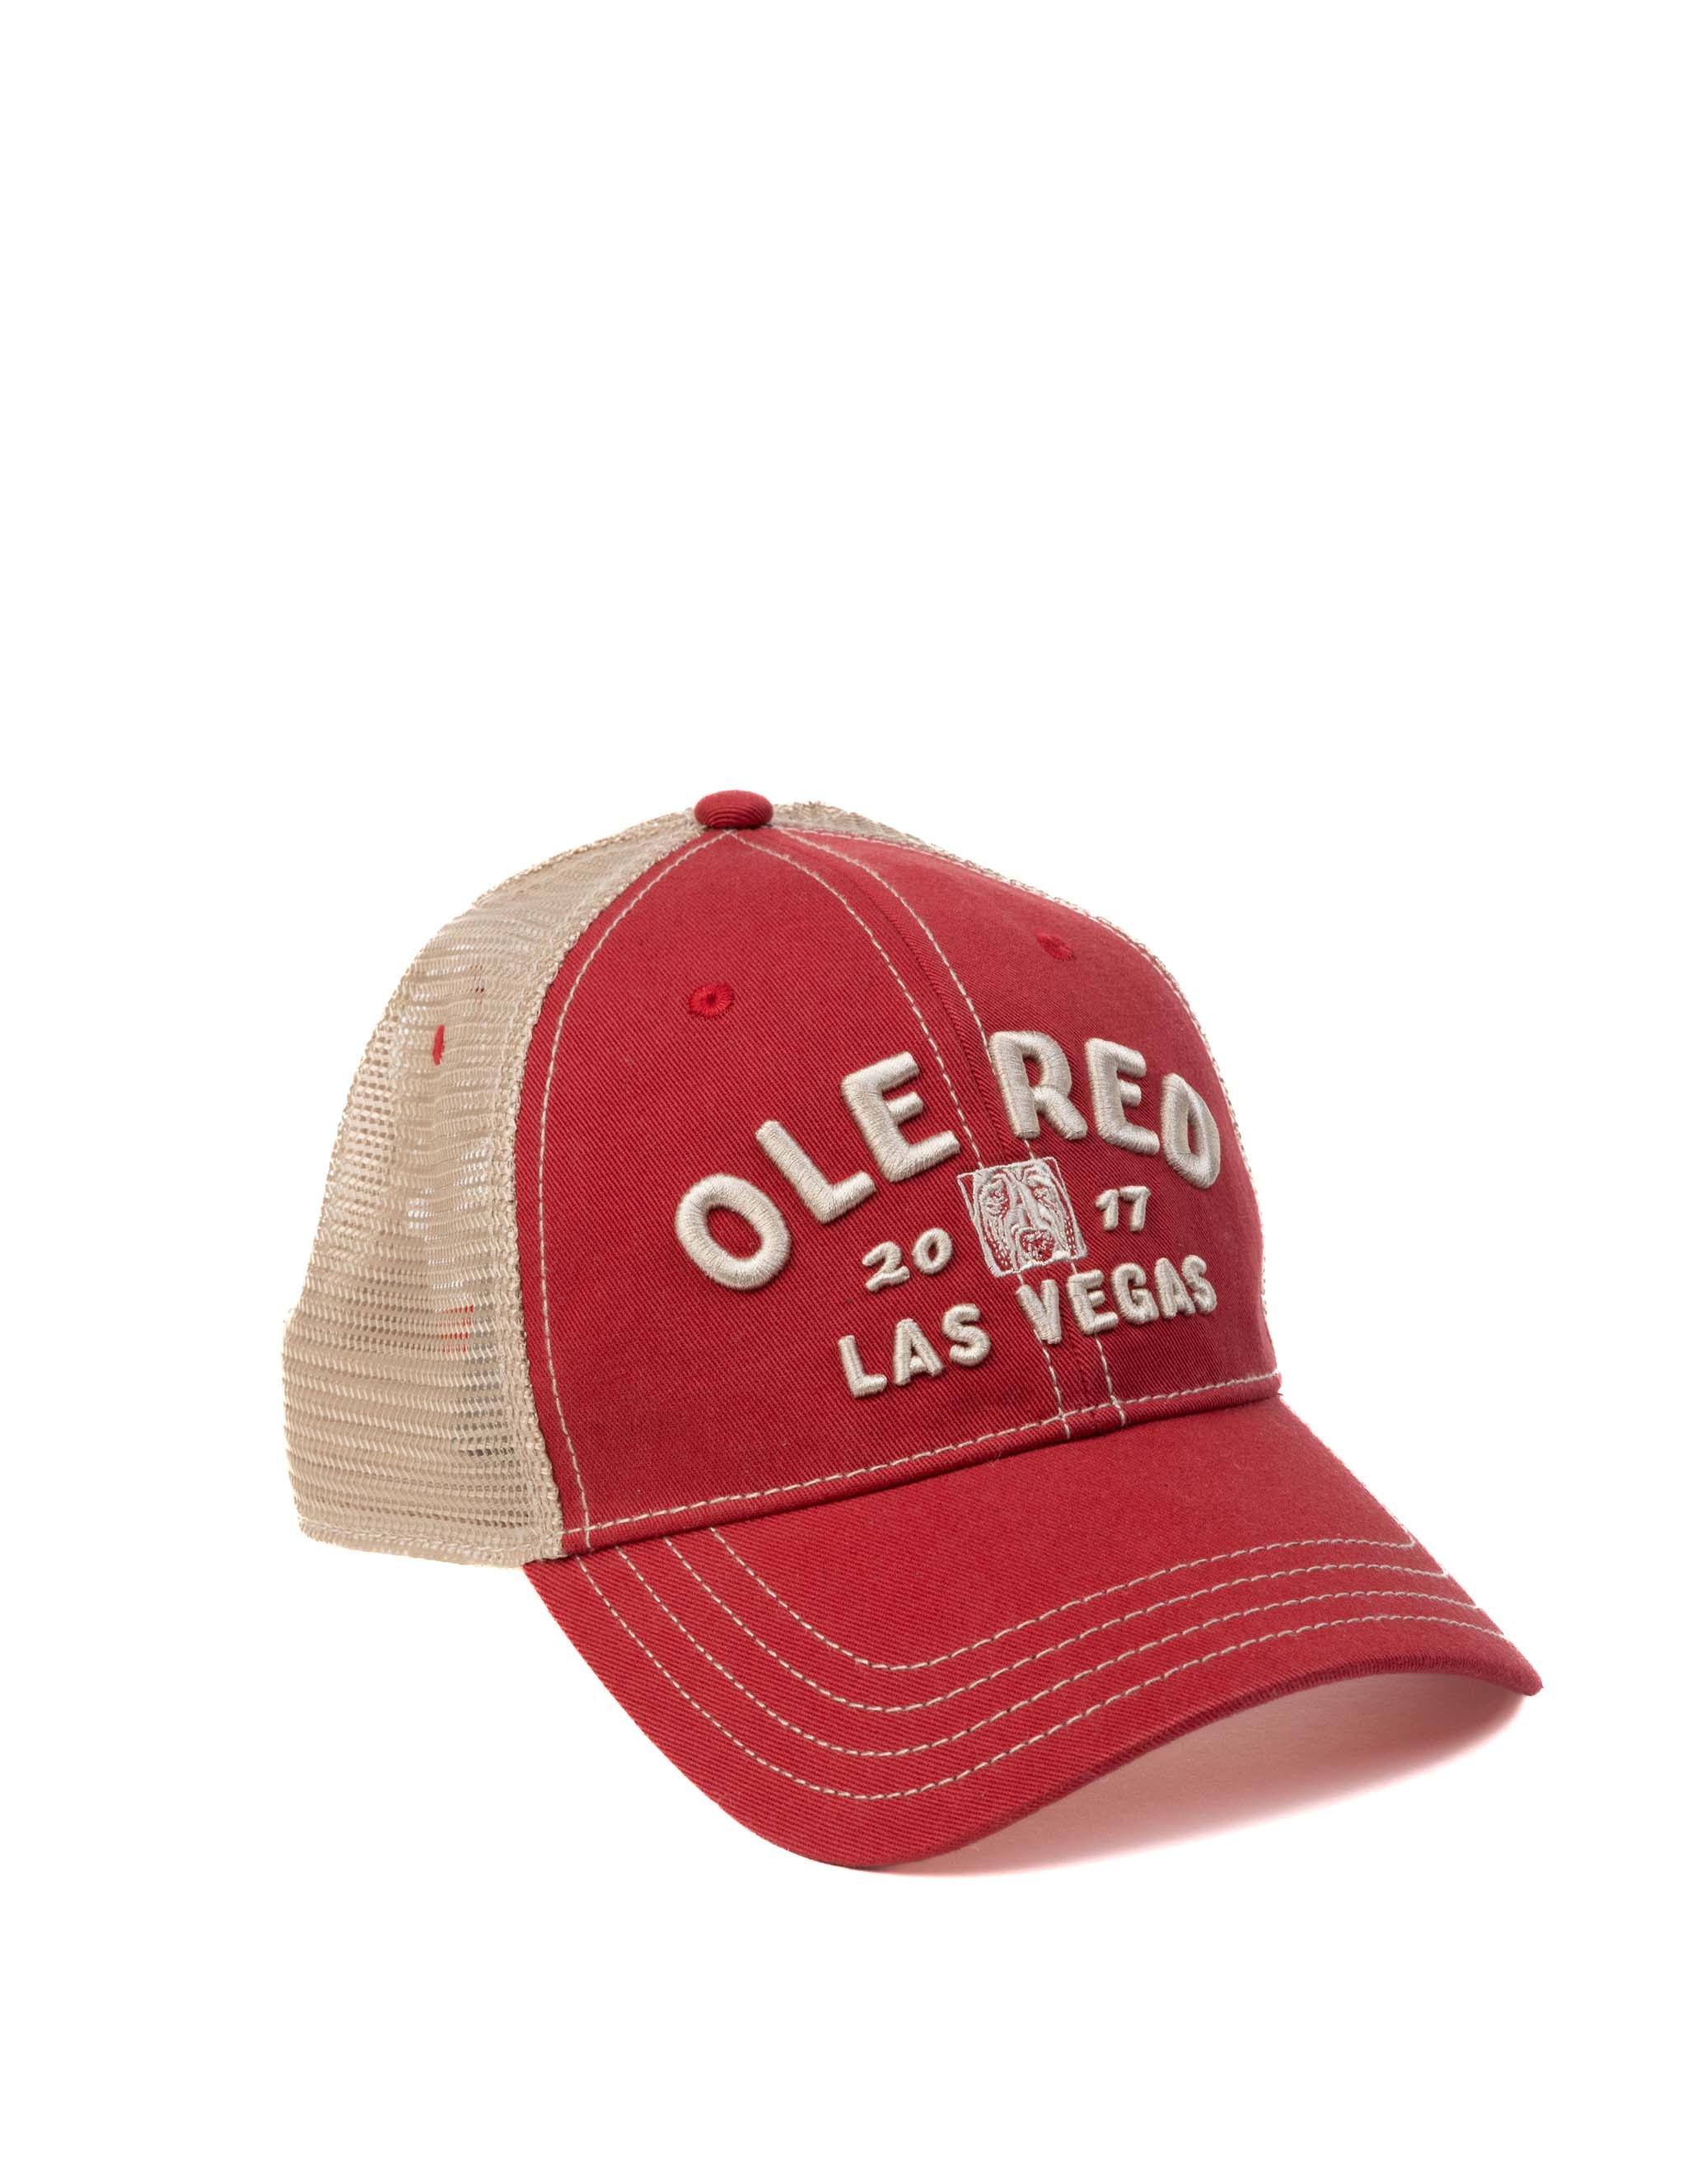 Ole Red Vegas Dog Face Hat